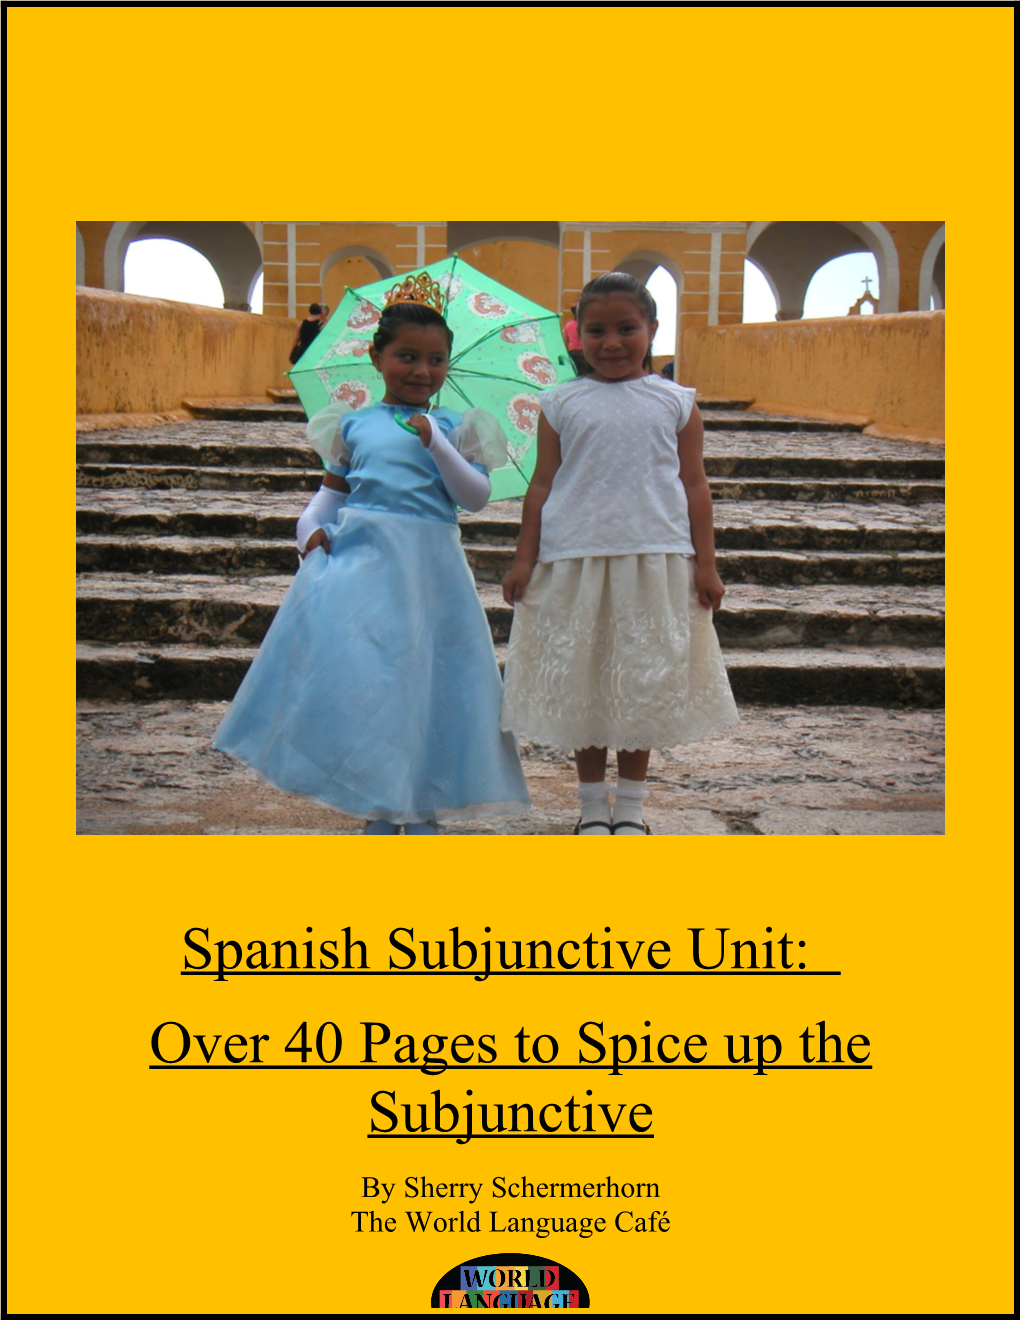 Spanish Subjunctive Unit: Over 20 Pages To Spice Up The Subjunctive